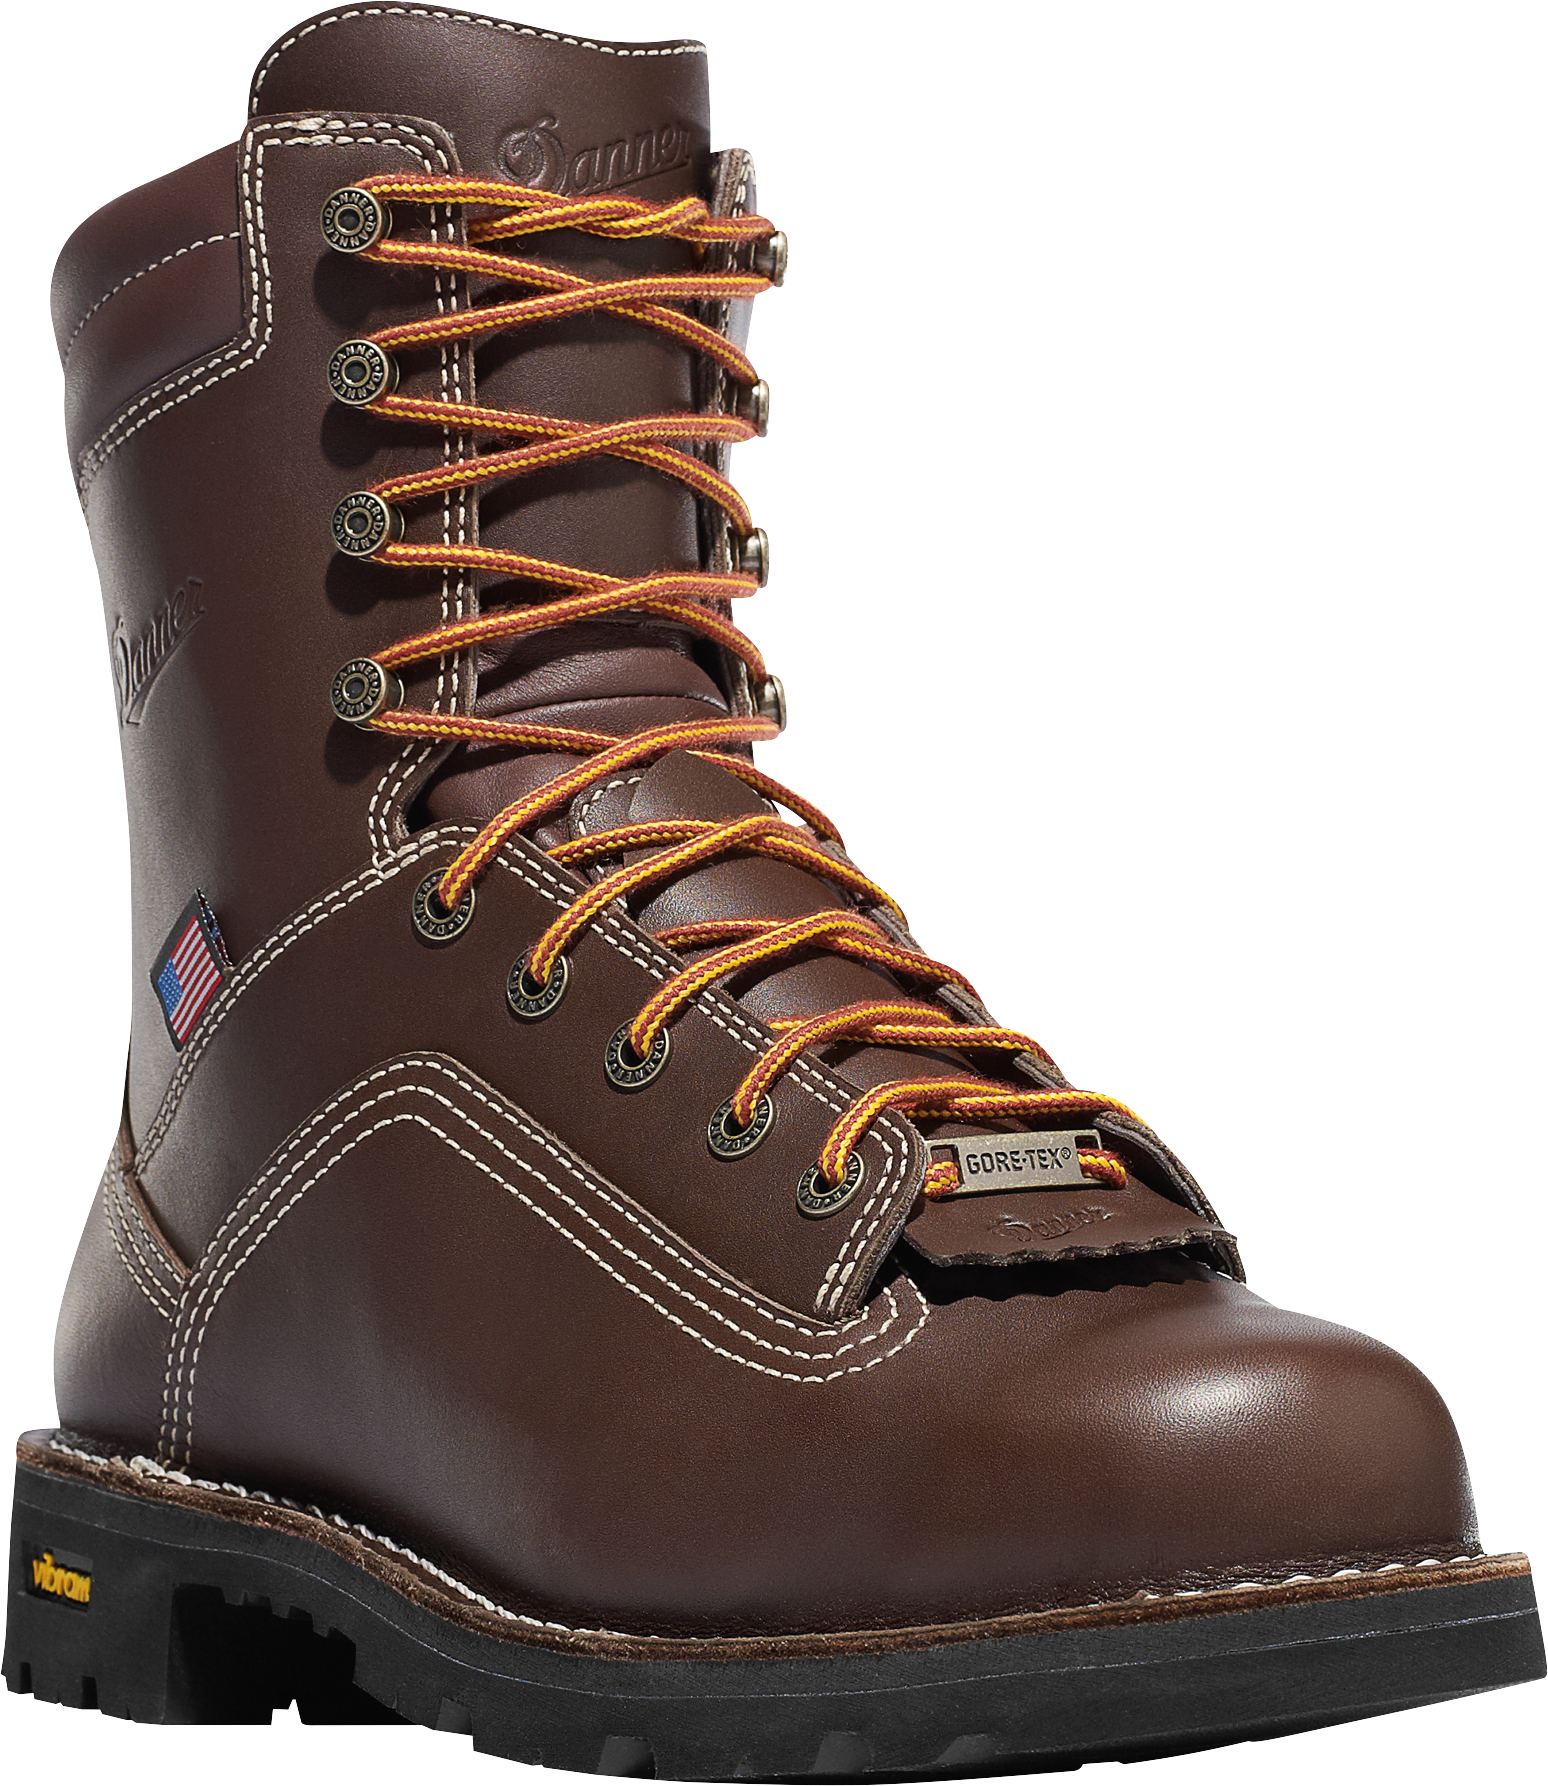 Danner Quarry USA Brown GORE-TEX Alloy Toe Work Boots for Men - Brown - 12W